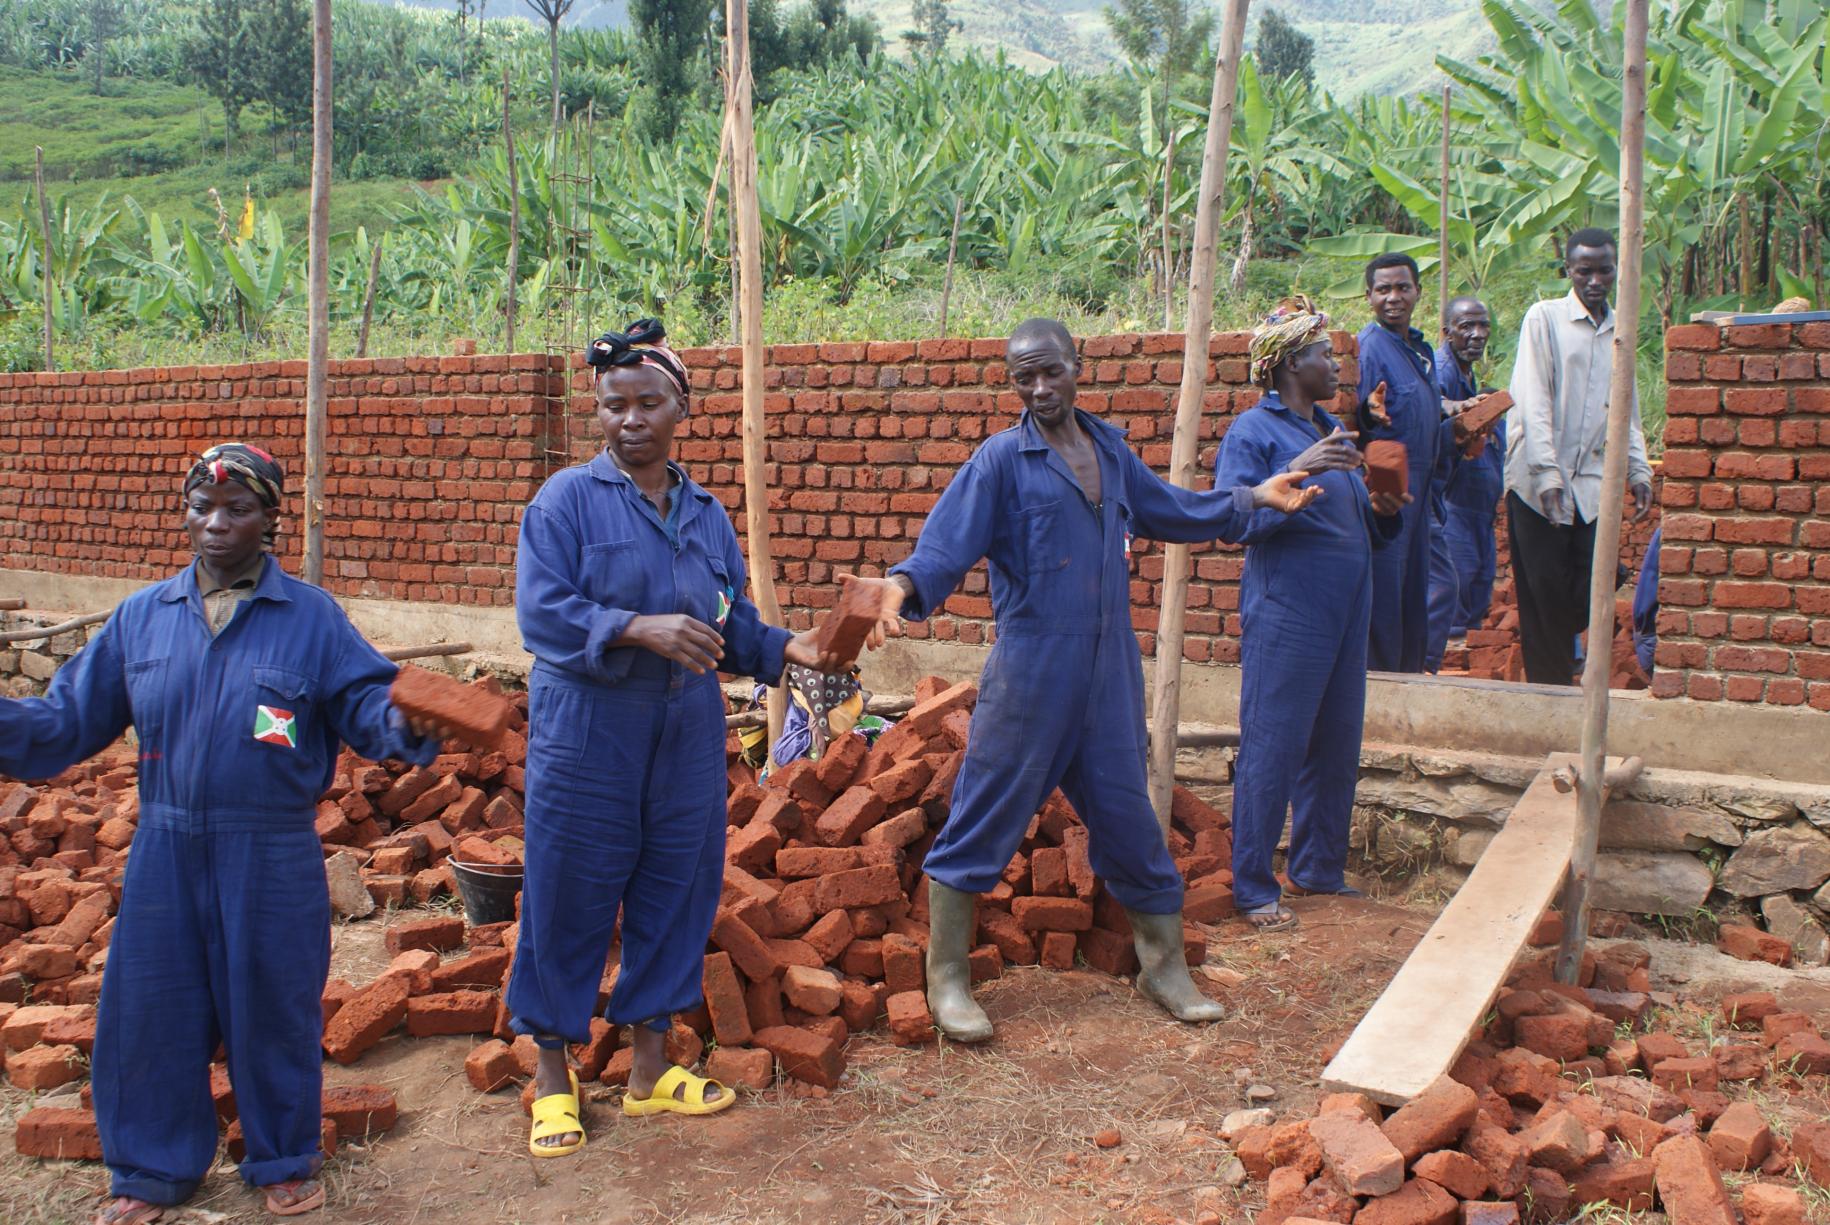 Shows an assembly line of people passing along bricks as they take part in a construction.